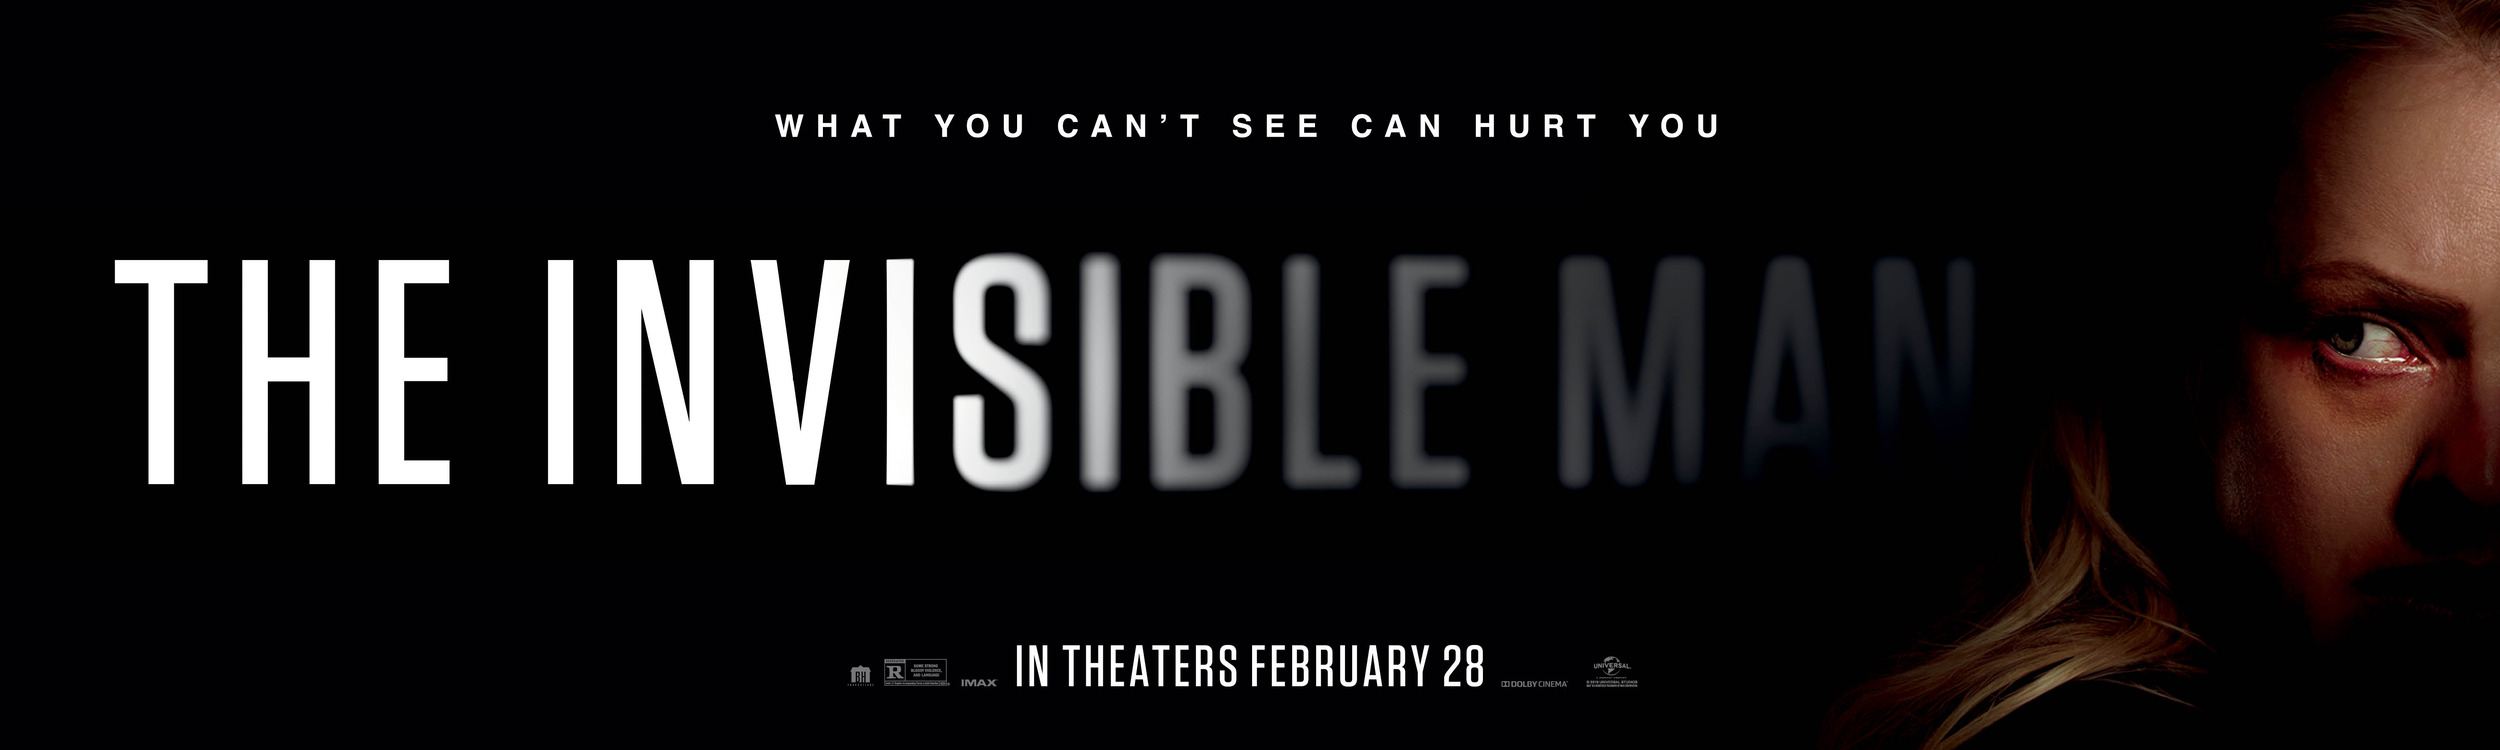 Mega Sized Movie Poster Image for The Invisible Man (#3 of 13)